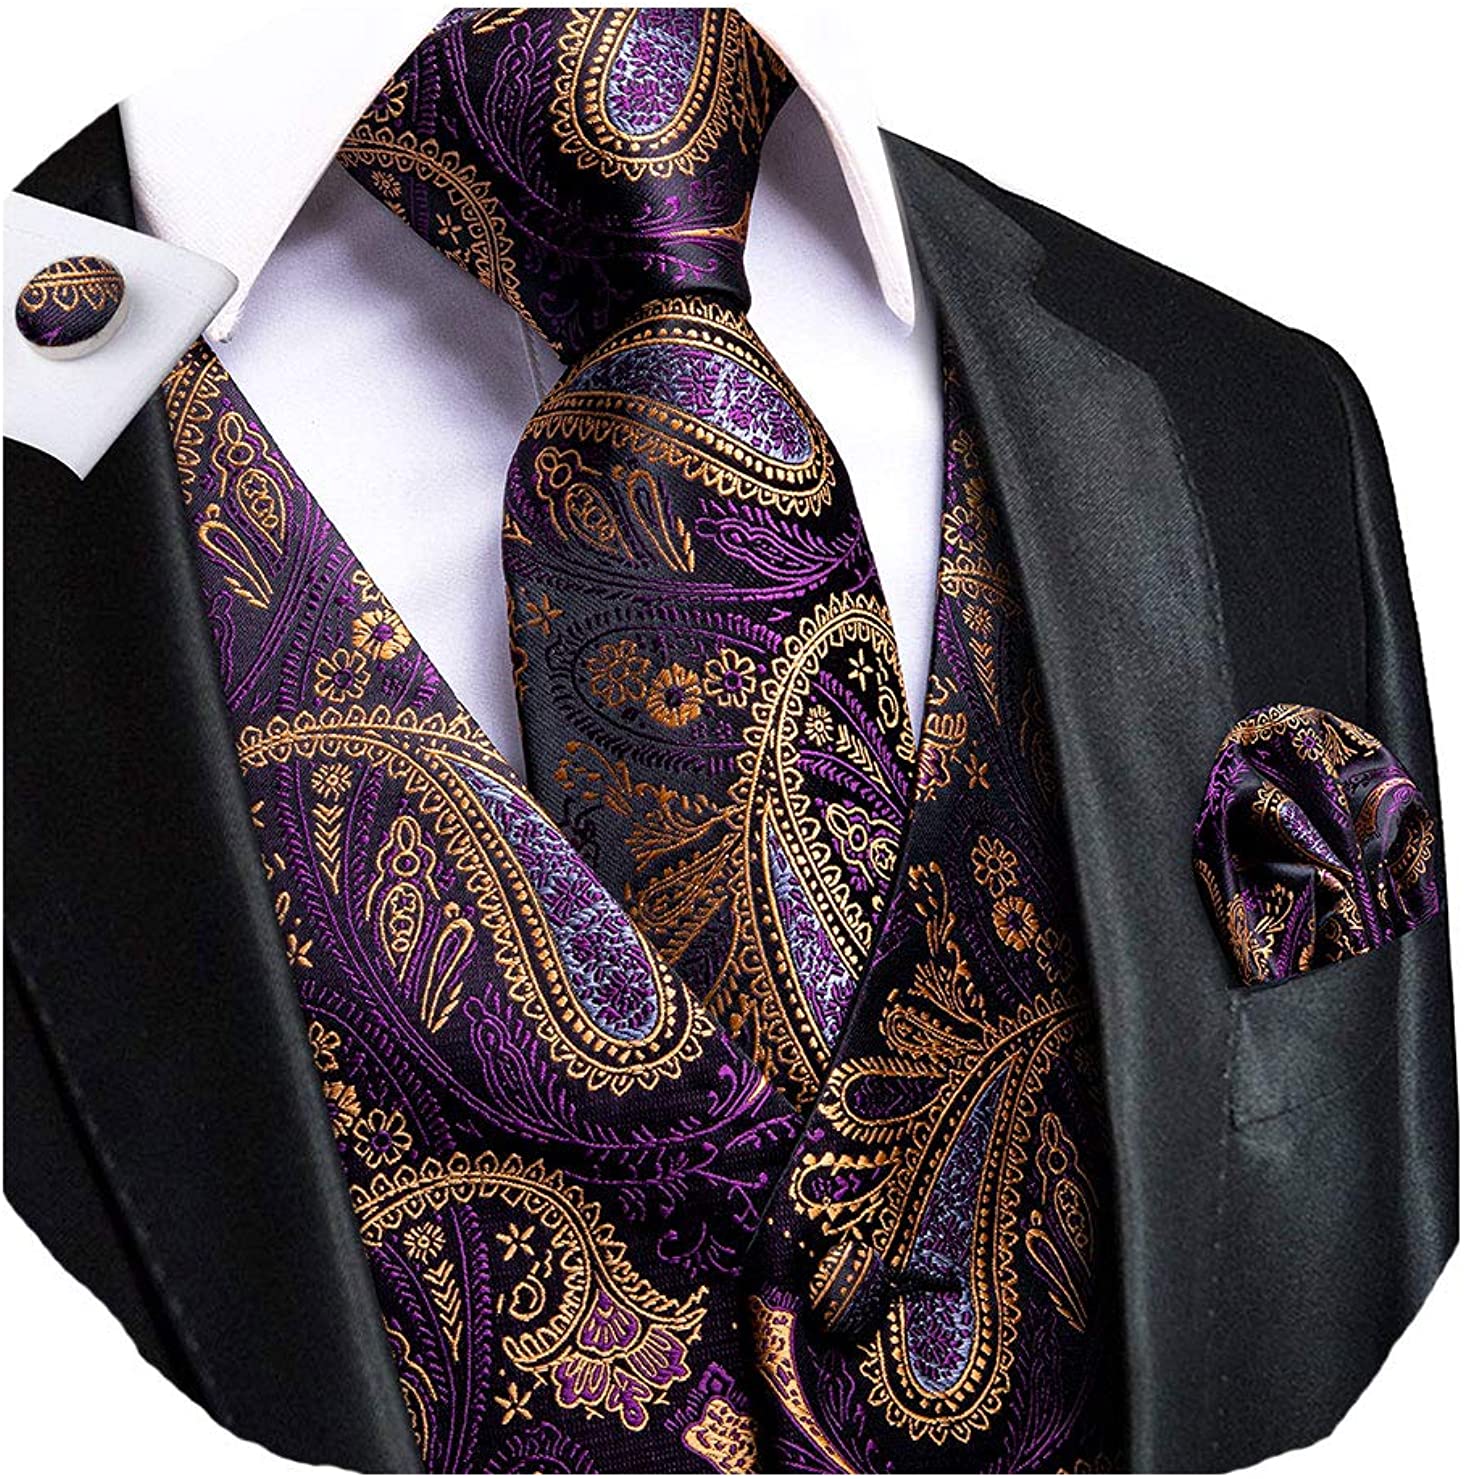 Dubulle Mens Paisley Tie and Vest Set with Pocket Square Cufflinks WaistCoat Suit for Tuxedo 